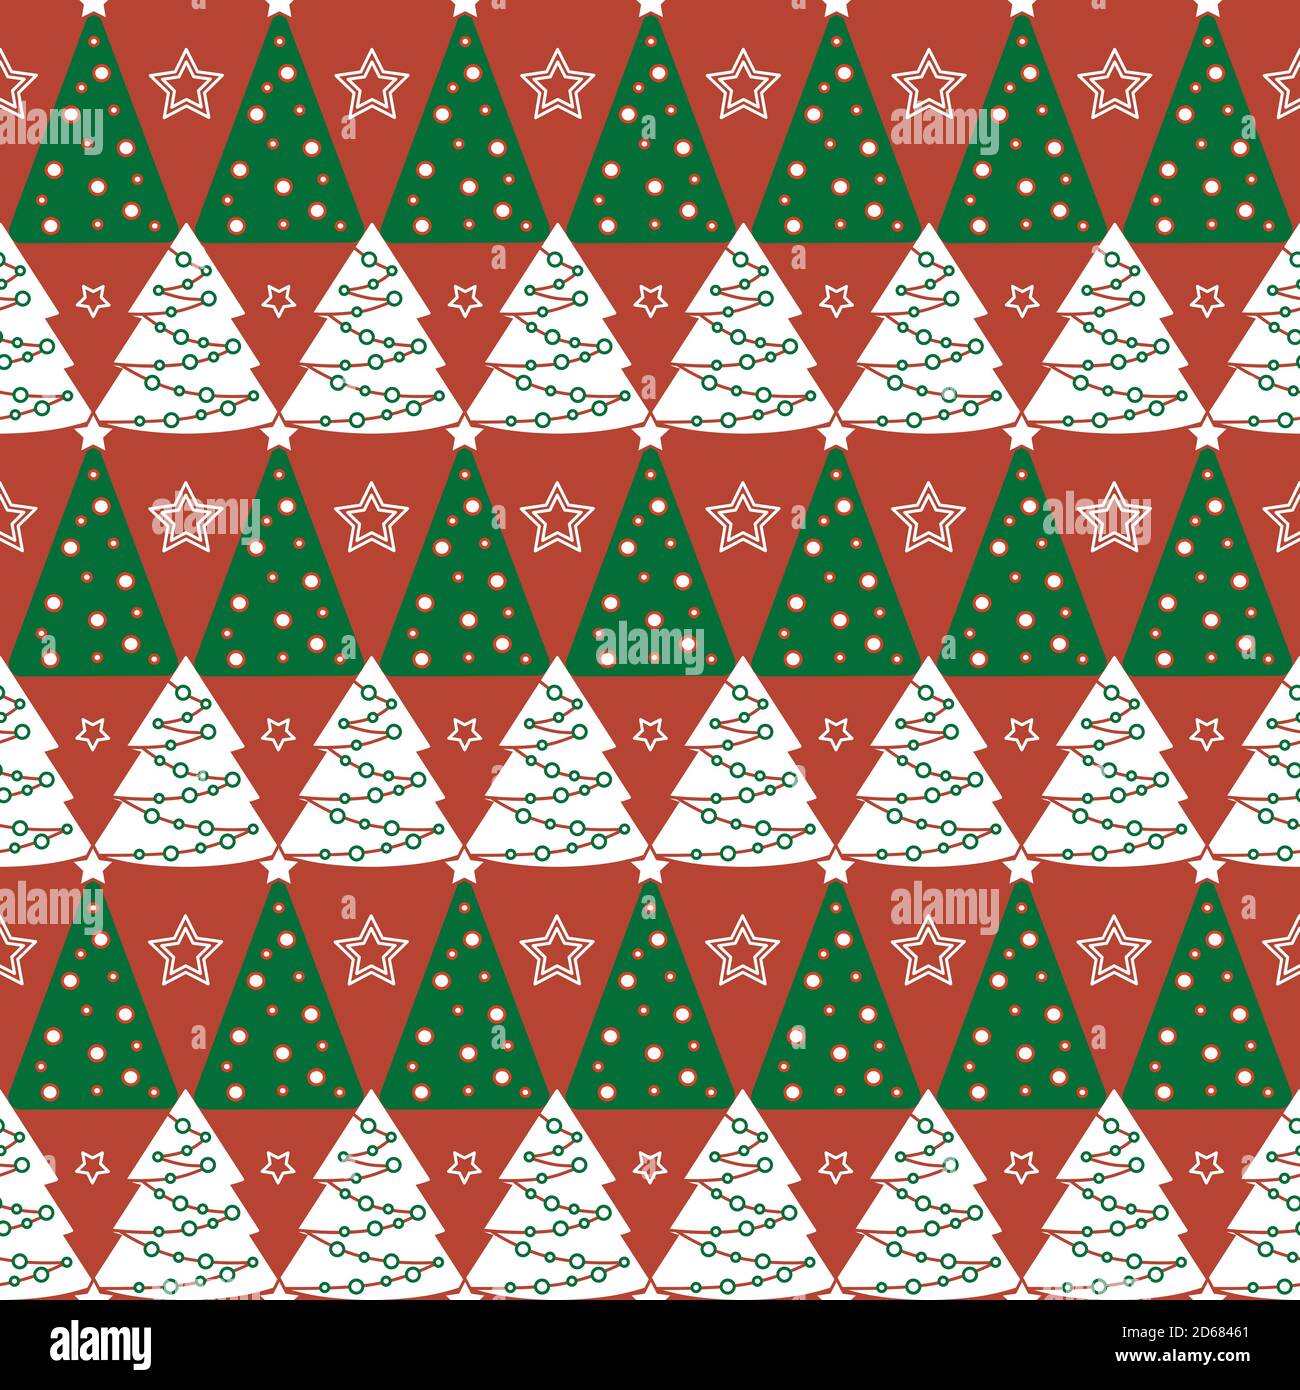 Christmas tree seamless pattern. Geometric pattern with Christmas trees and stars. Red, green and white colors Stock Vector